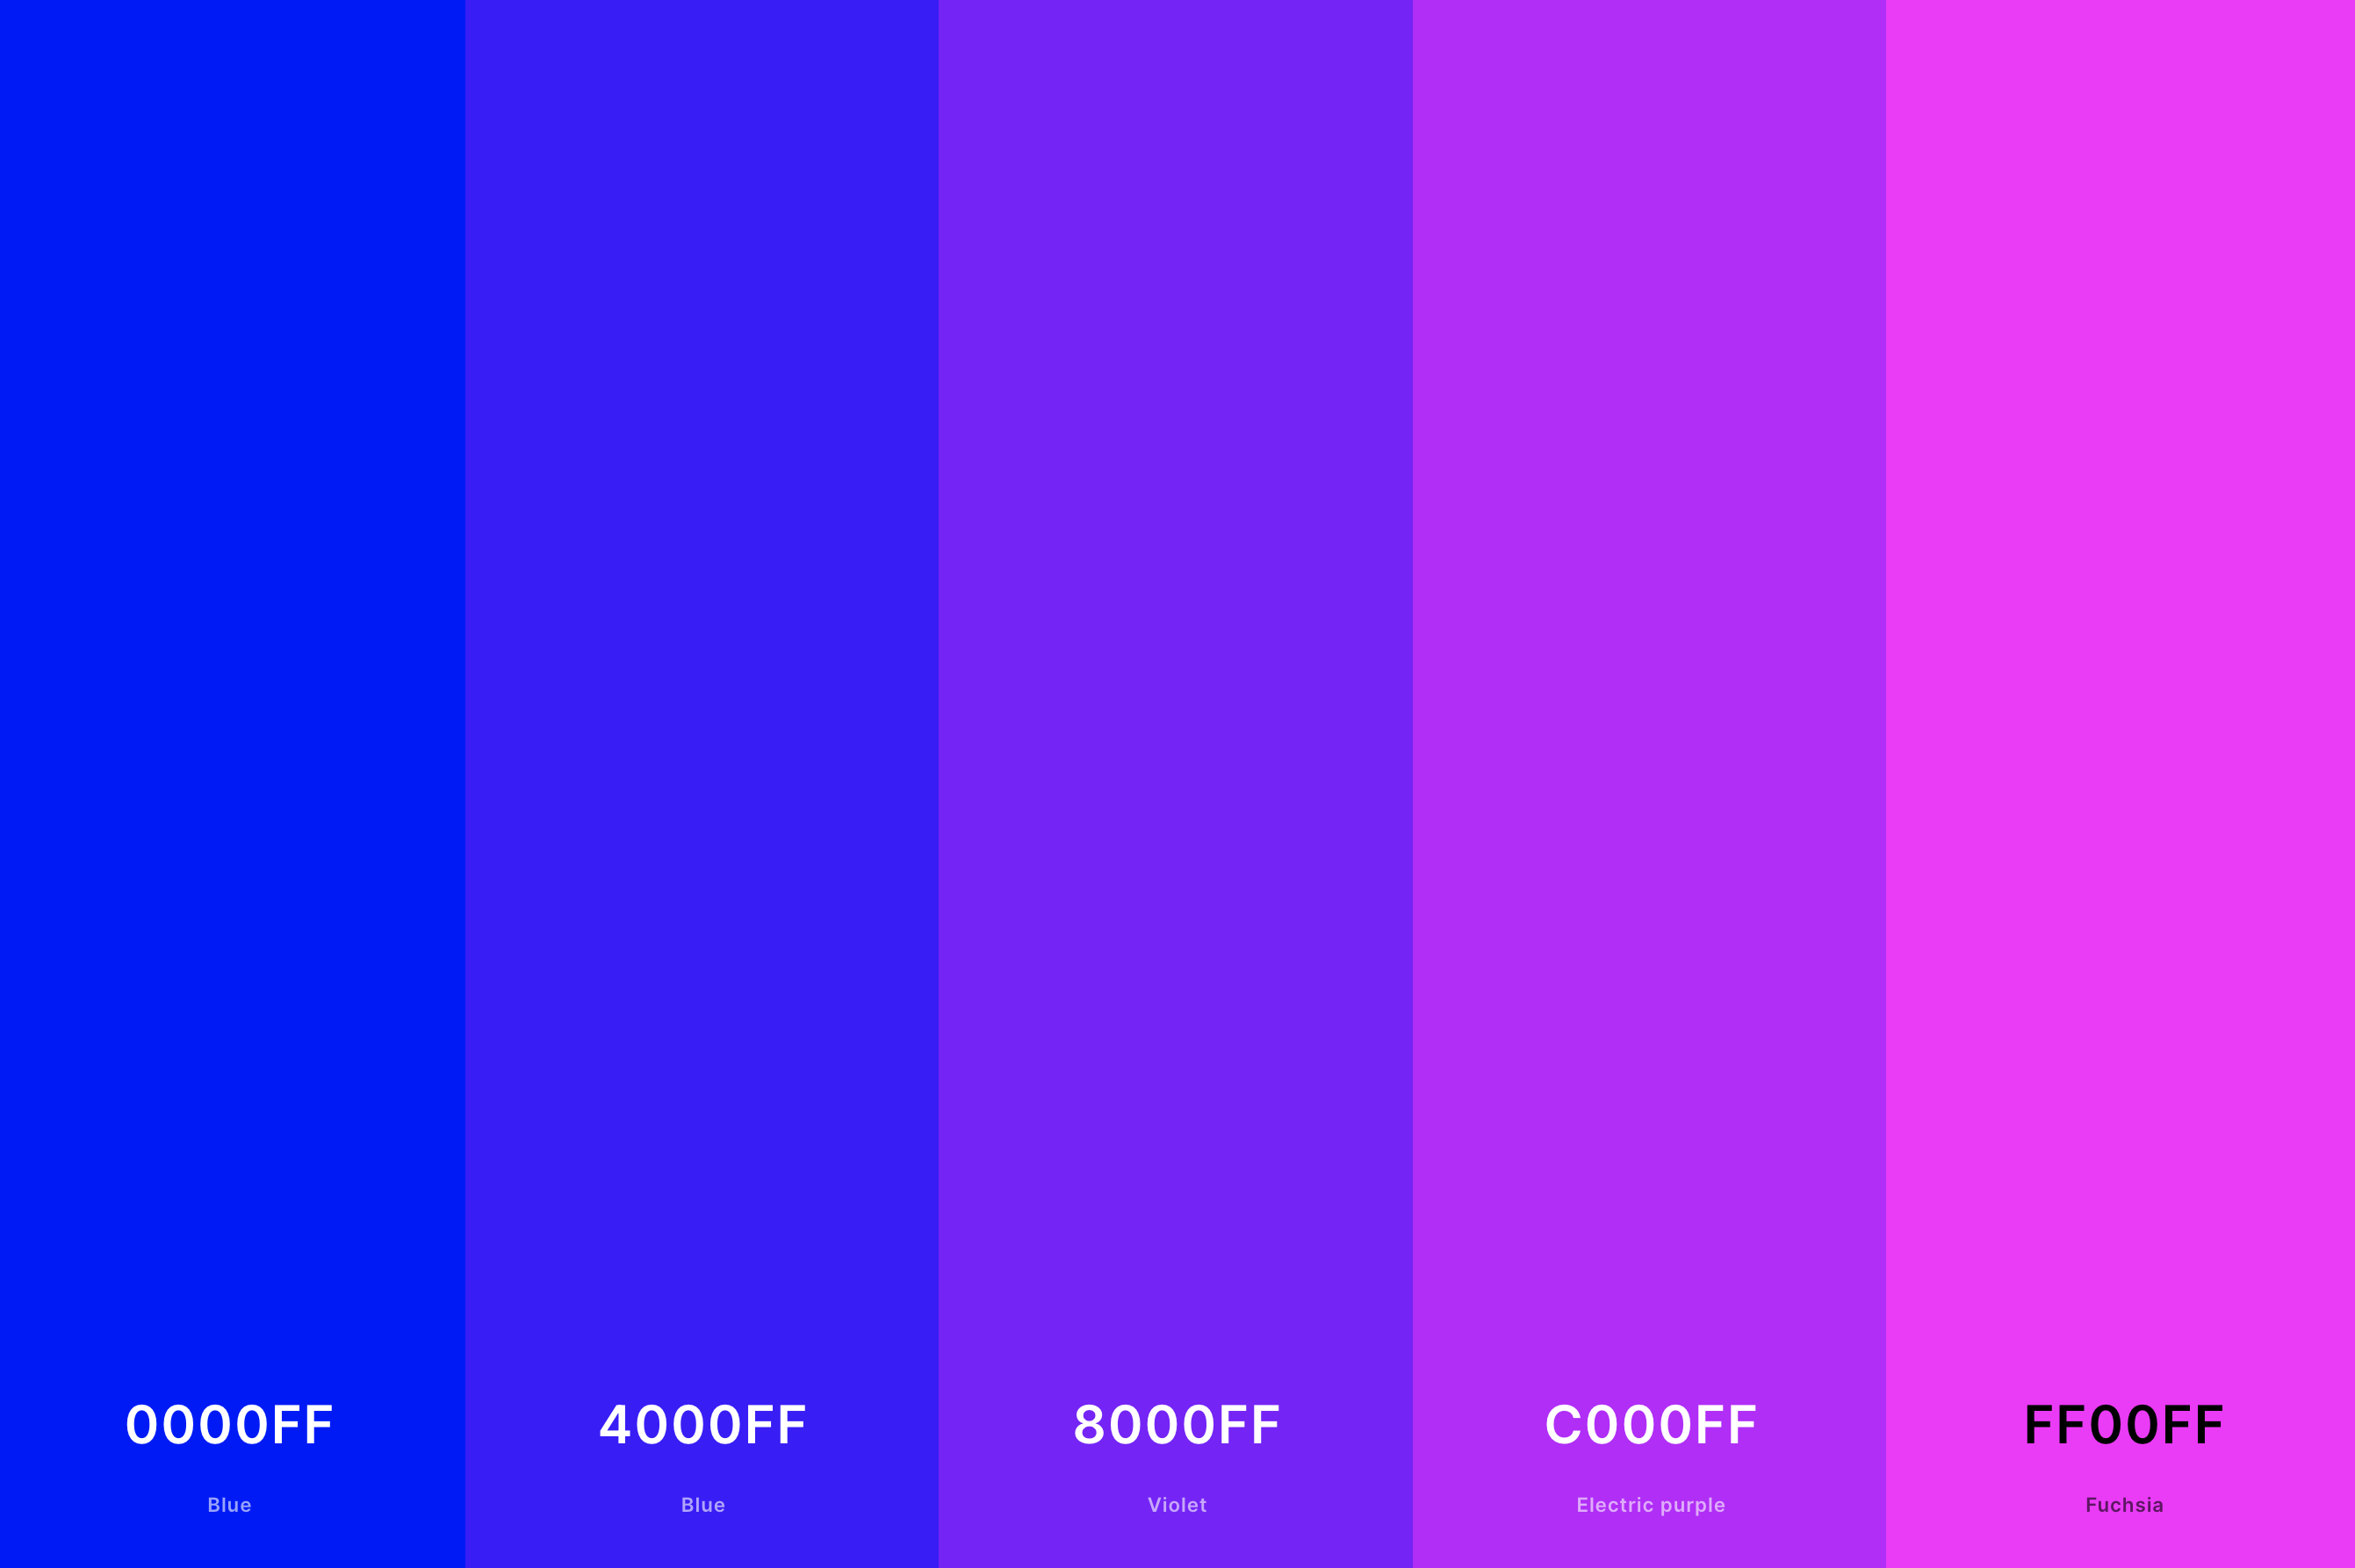 2. Blue And Magenta Color Palette Color Palette with Blue (Hex #0000FF) + Blue (Hex #4000FF) + Violet (Hex #8000FF) + Electric Purple (Hex #C000FF) + Magenta (Hex #FF00FF) Color Palette with Hex Codes